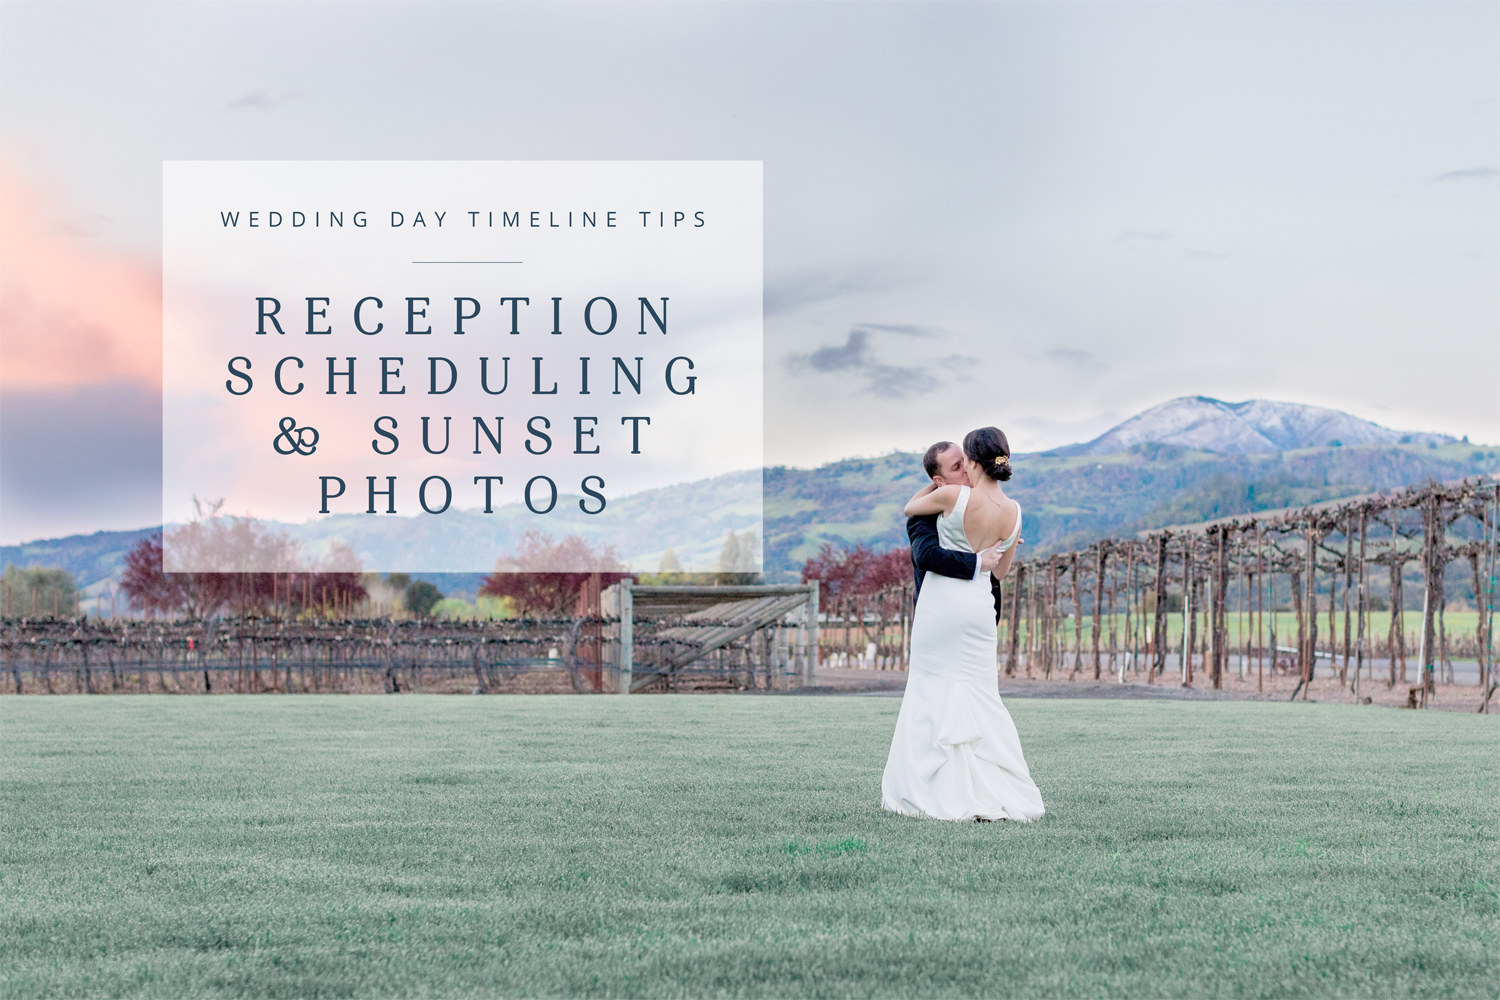 Click through to see how to plan your reception "activities" and why sunset portraits are imperetive. It’s time away from everyone, to soak in this moment with your new spouse.